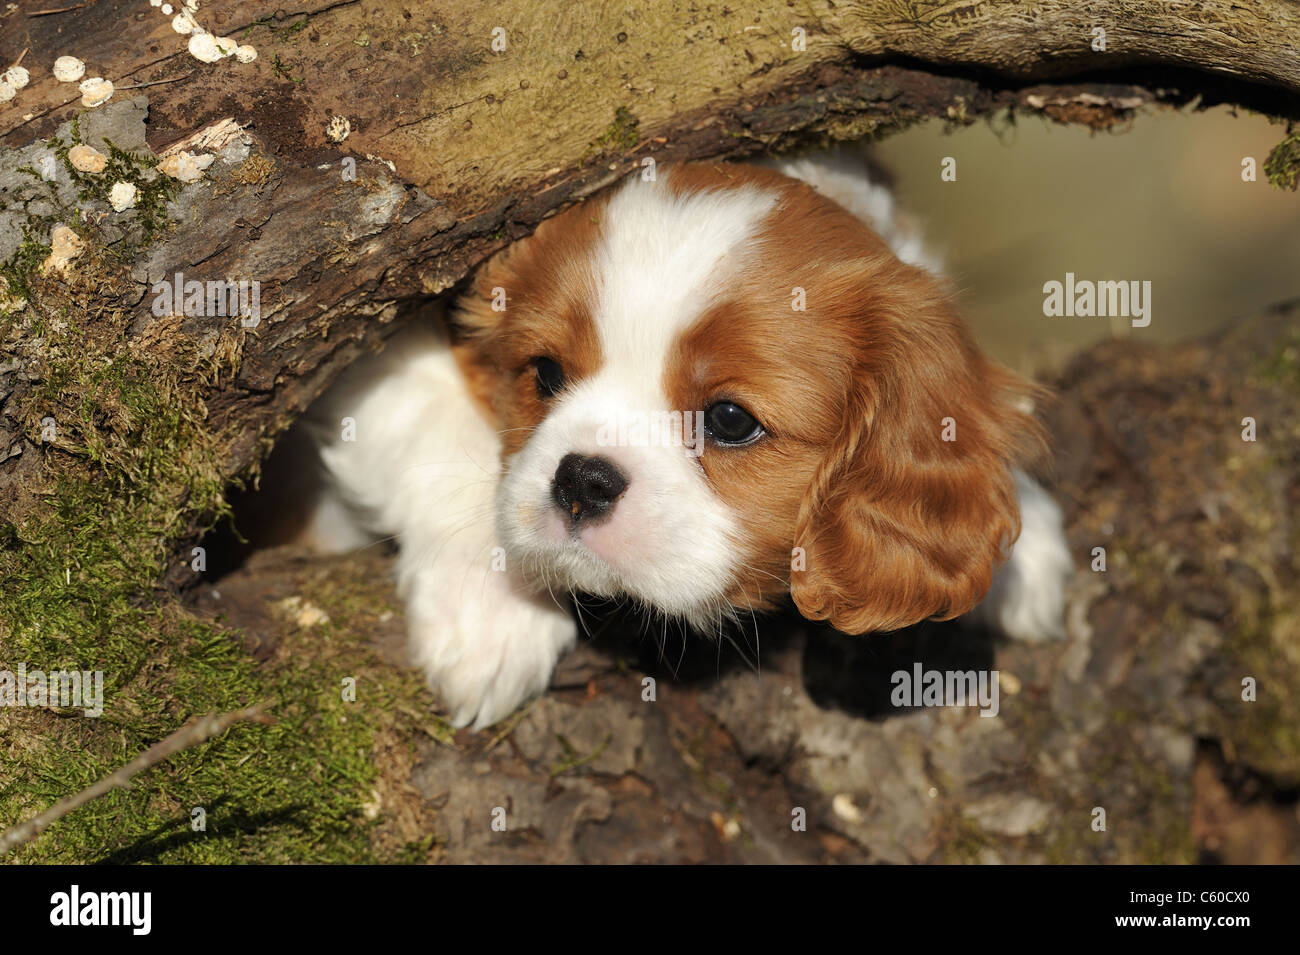 Cavalier King Charles Spaniel (Canis lupus familiaris), puppy looking out from between rotting branches. Stock Photo